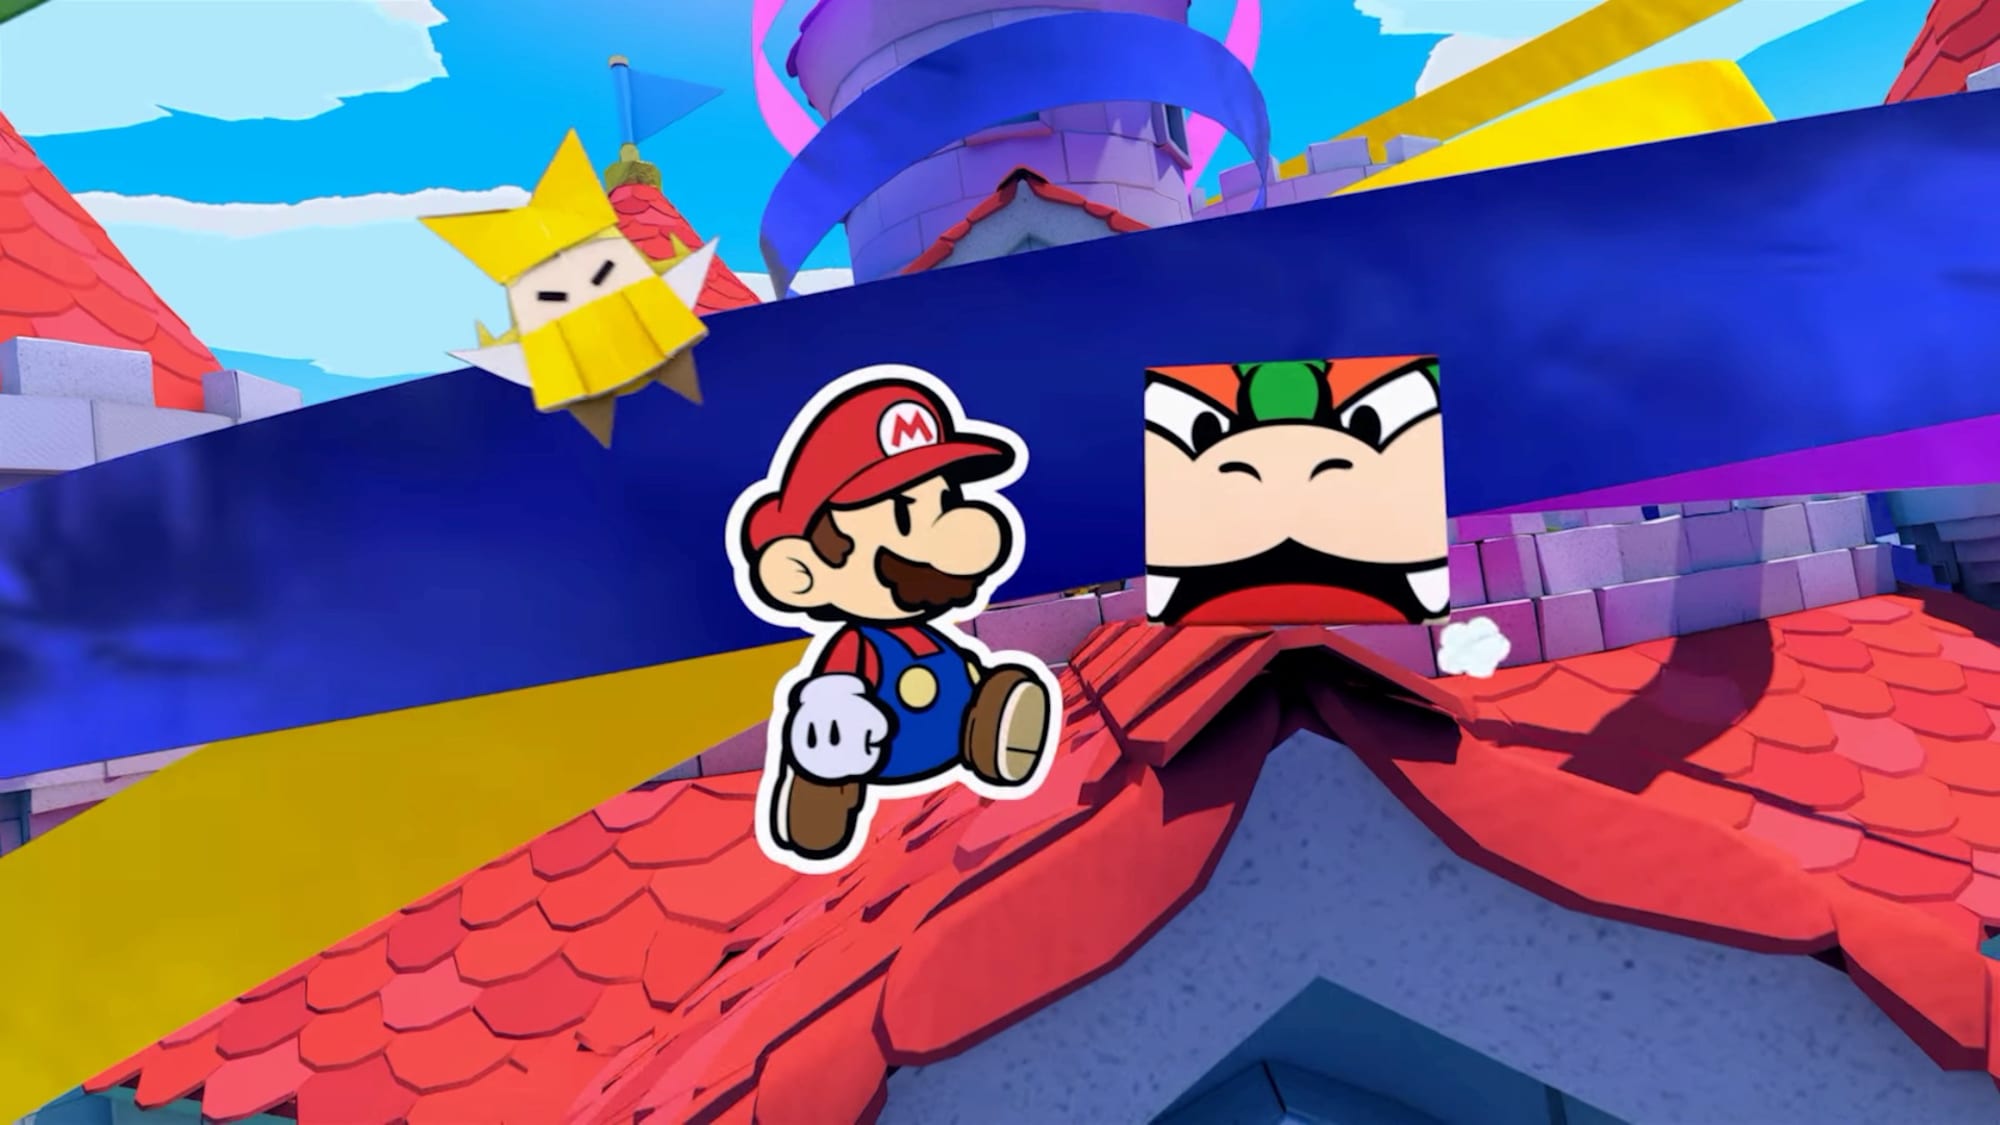 new paper mario game release date